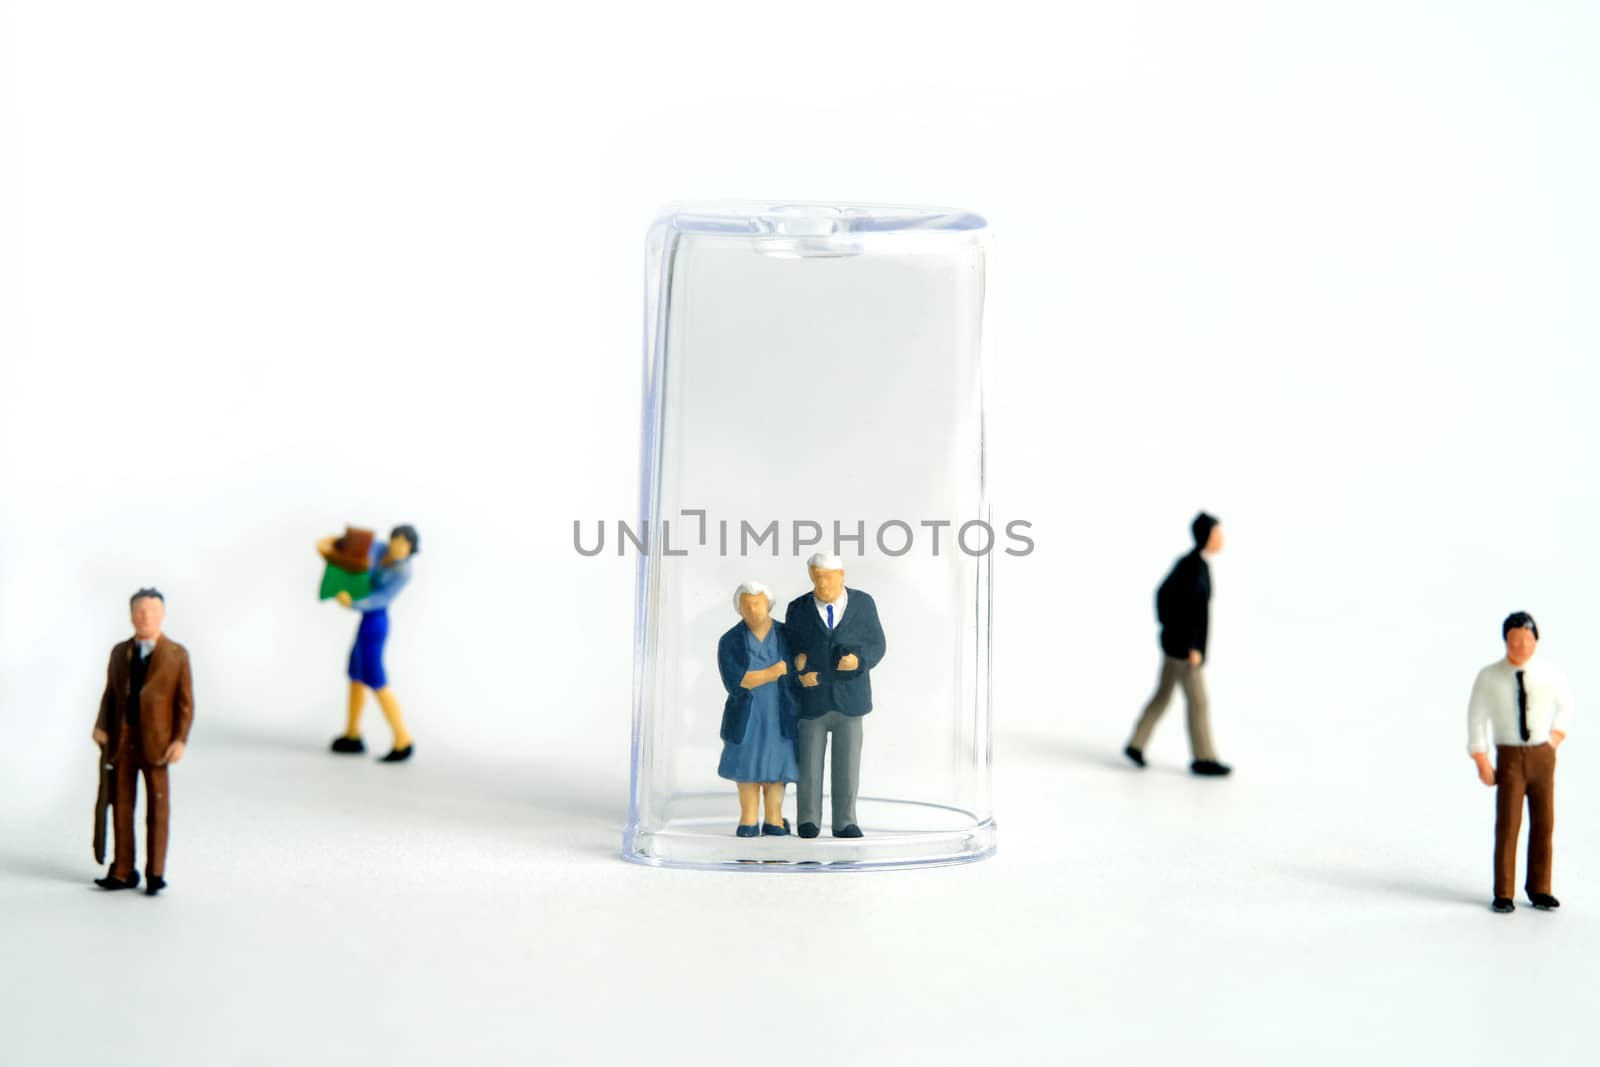 Pandemic corona virus conceptual miniature people photography – social distancing strategy - middle-aged figure on tube isolation by Macrostud